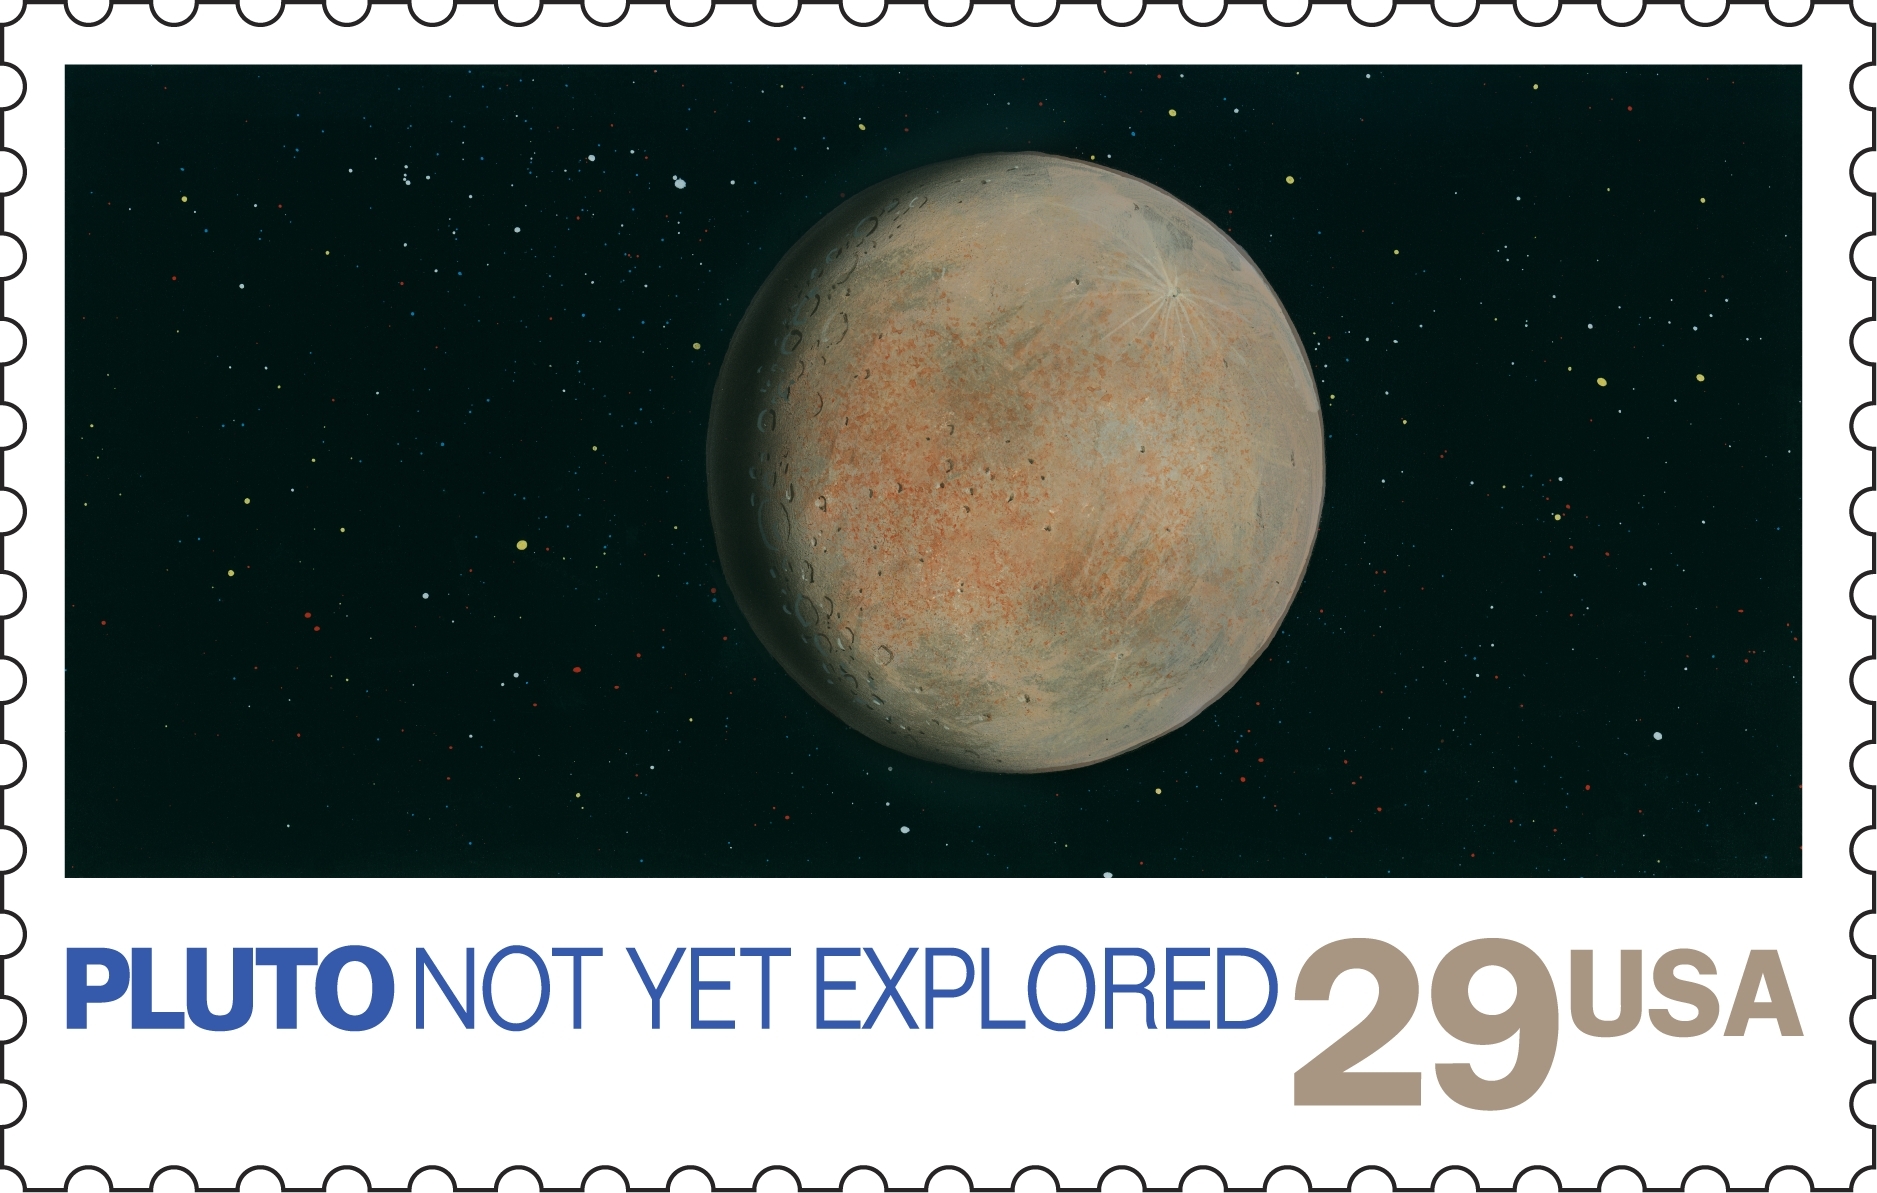 Pluto Not Yet Explored Postage Stamp